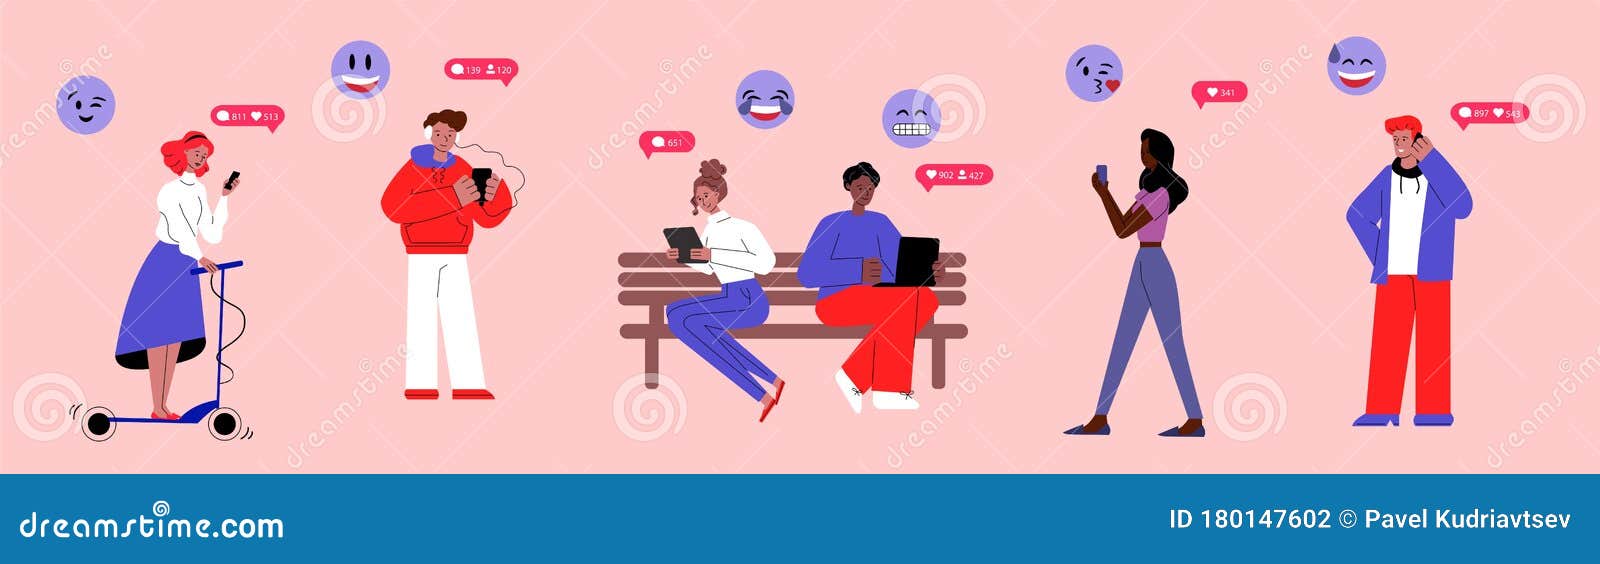 People Chatting and Messaging through Gadgets Flat Vector Illustration ...